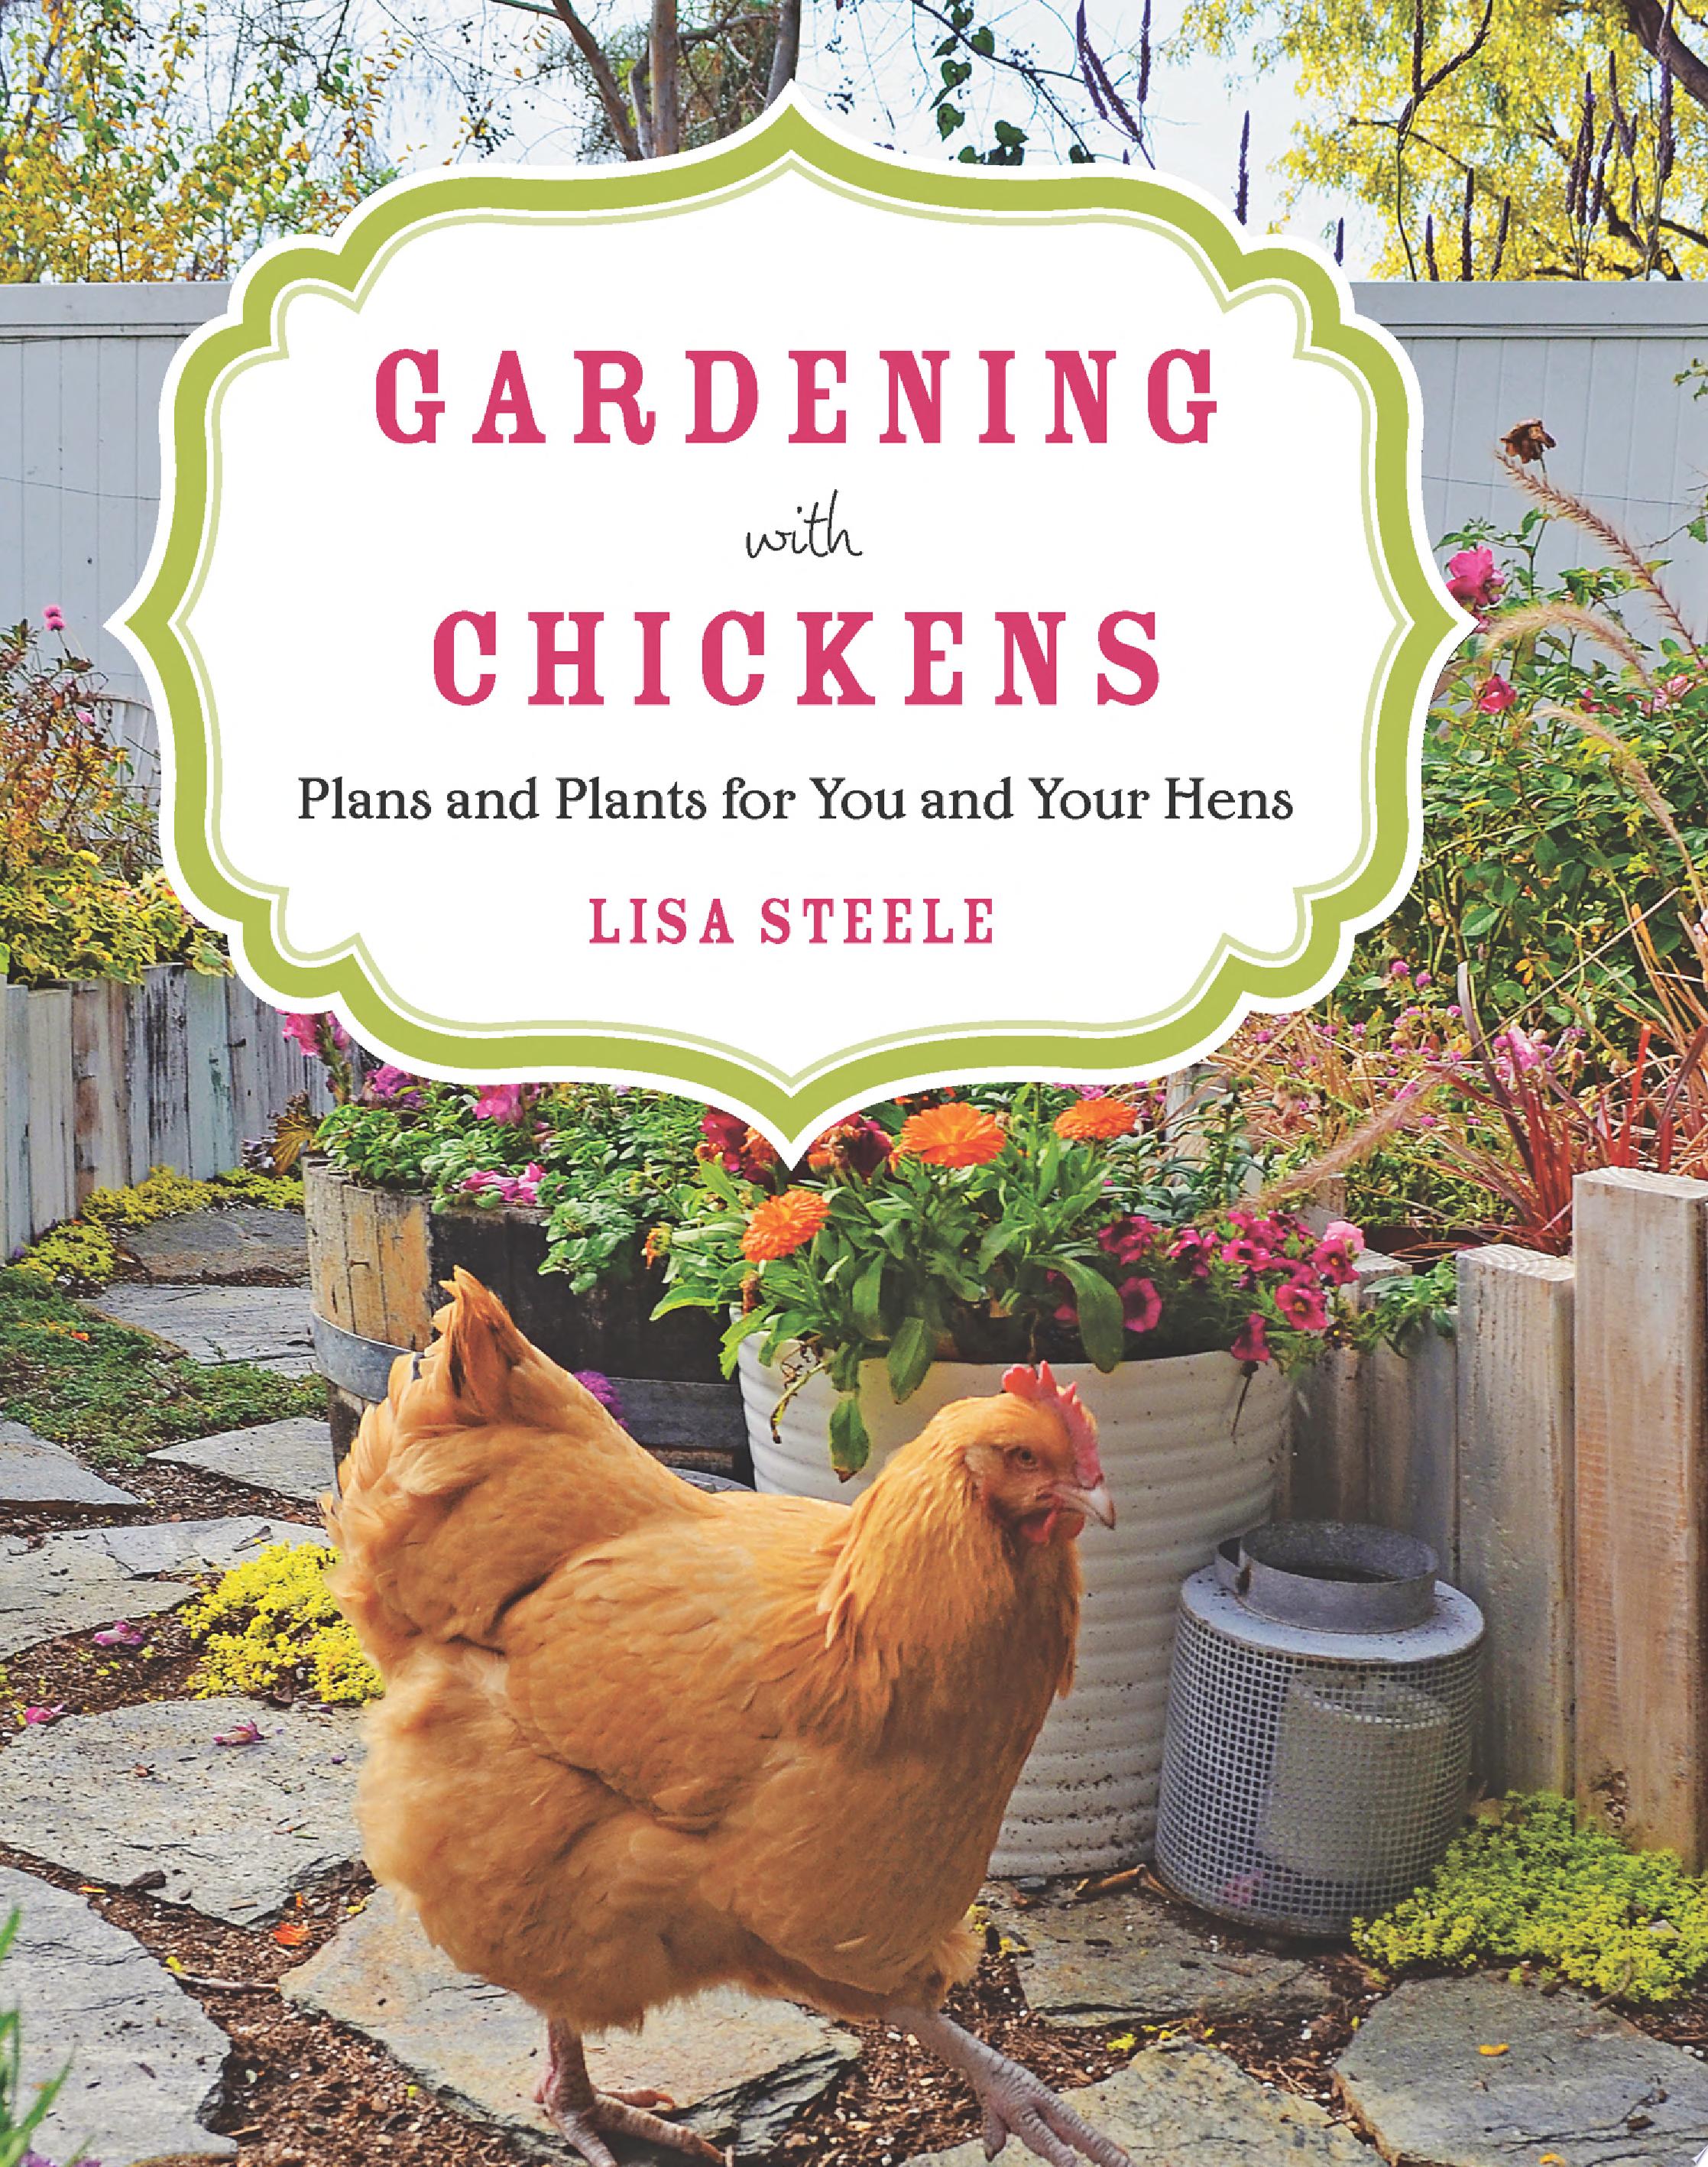 Image for "Gardening with Chickens"